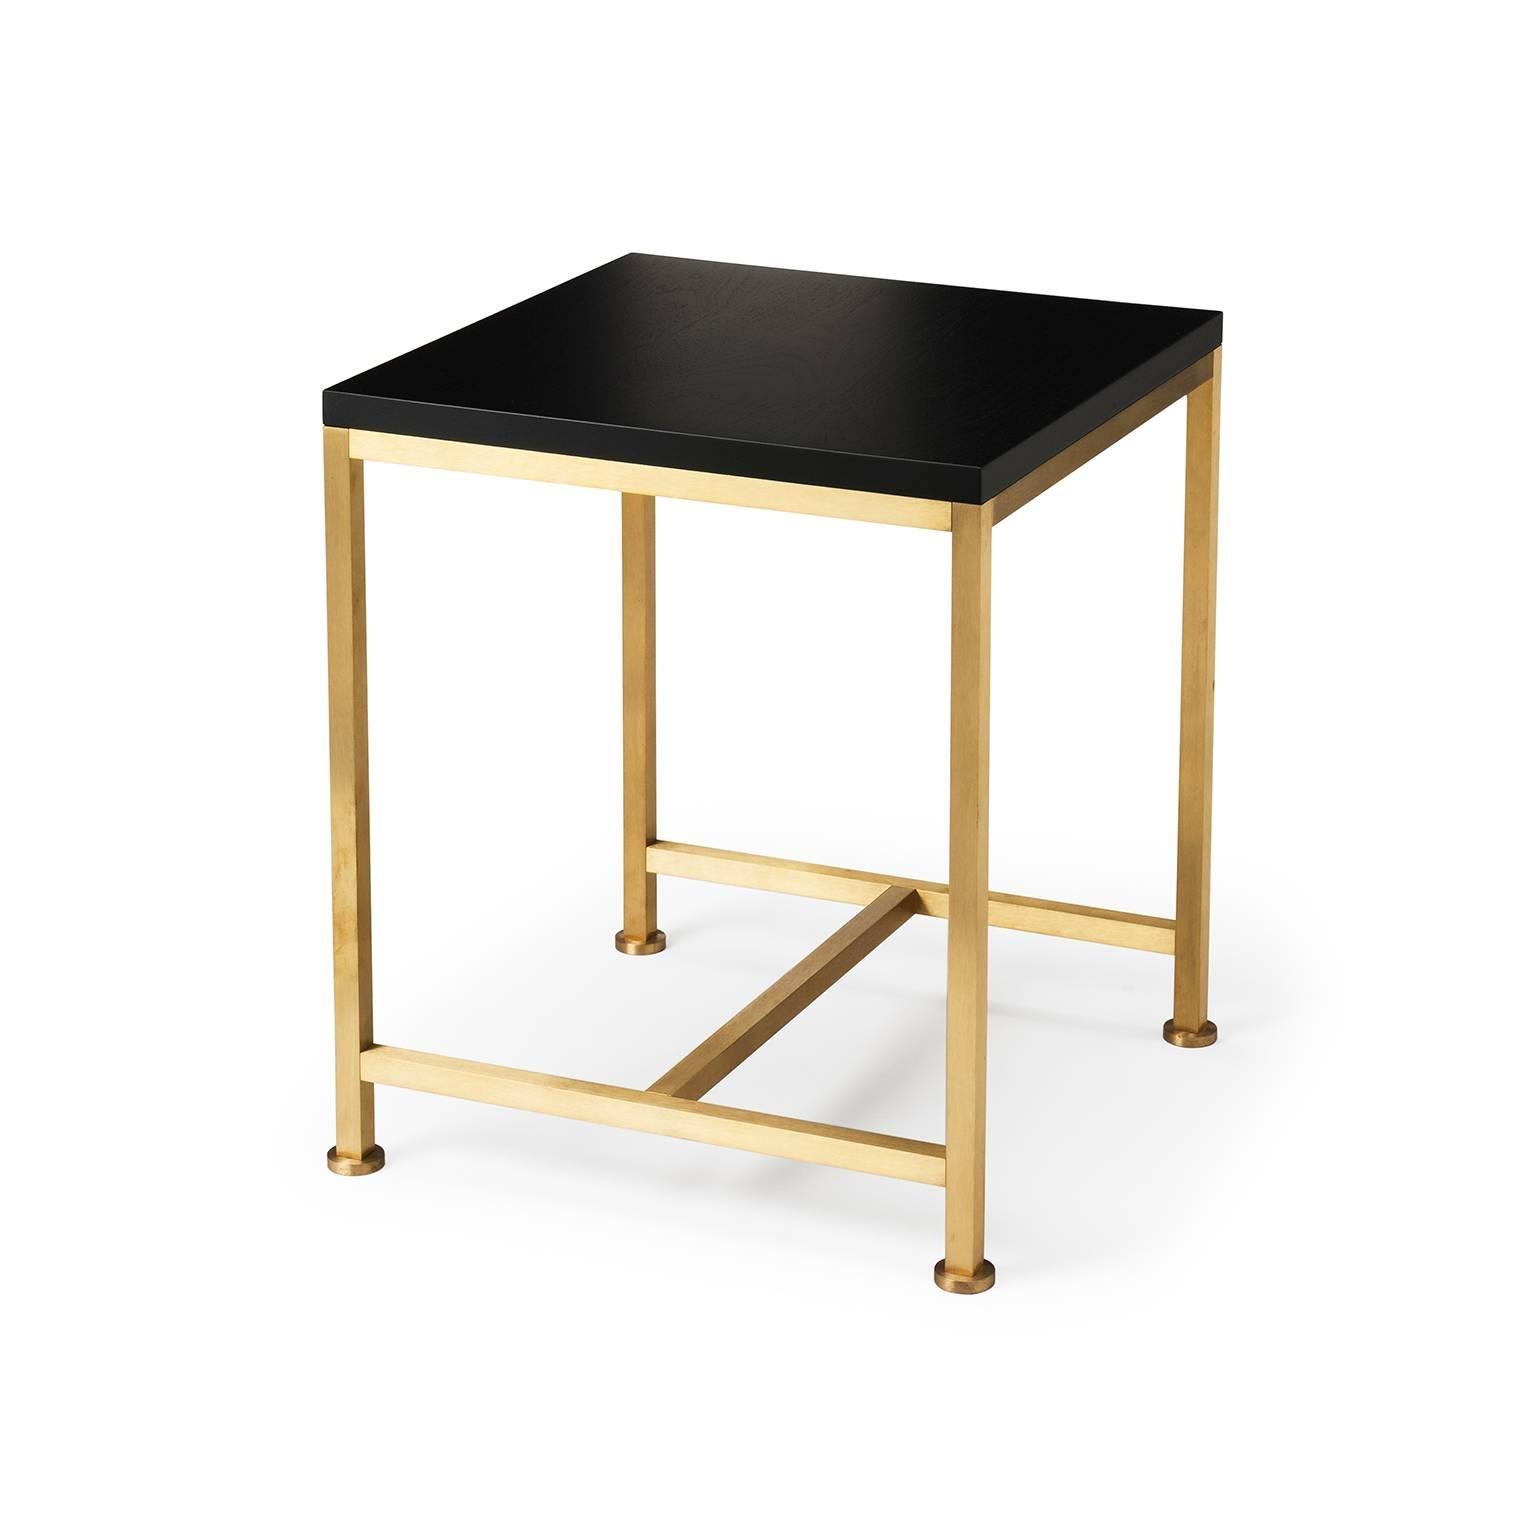 The Orichal range is perfectionist in its simplicity featuring a precision engineered solid brass frame with a top in walnut. Shown here in black lacquered walnut and brushed brass. The top is made from solid and veneered timber. The brass is